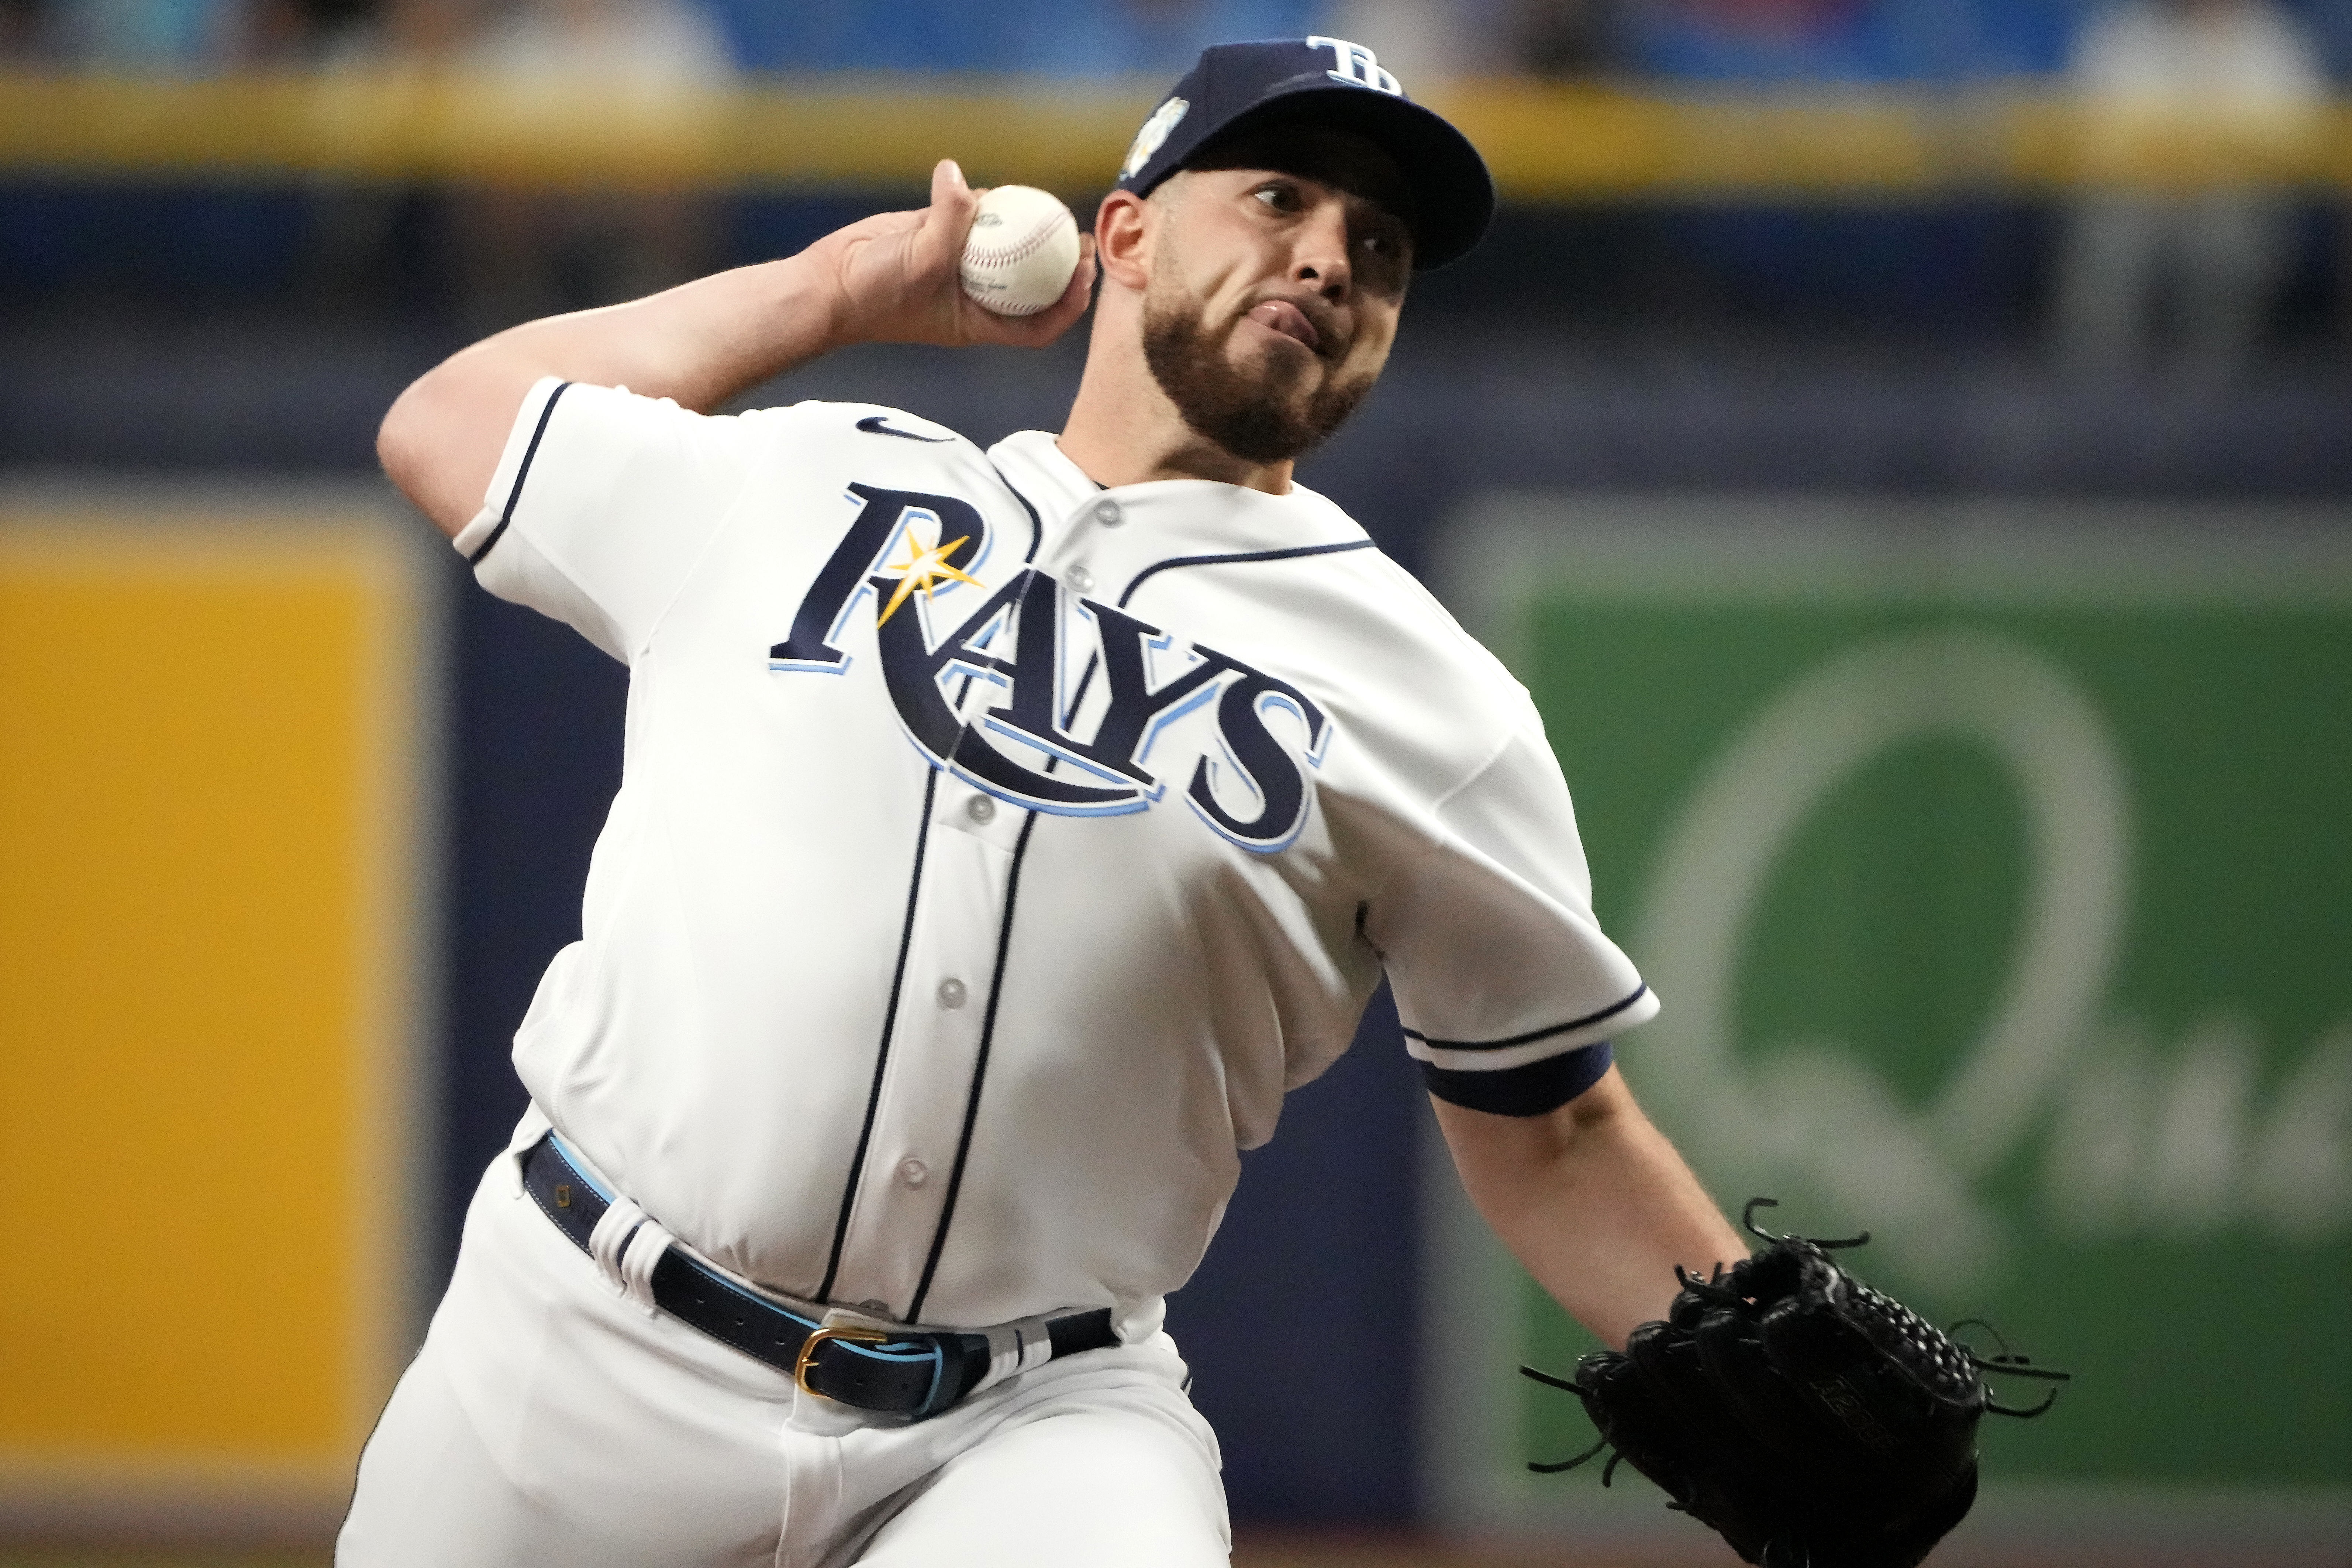 Rays rally late again as Brandon Lowe delivers walkoff win over Rockies